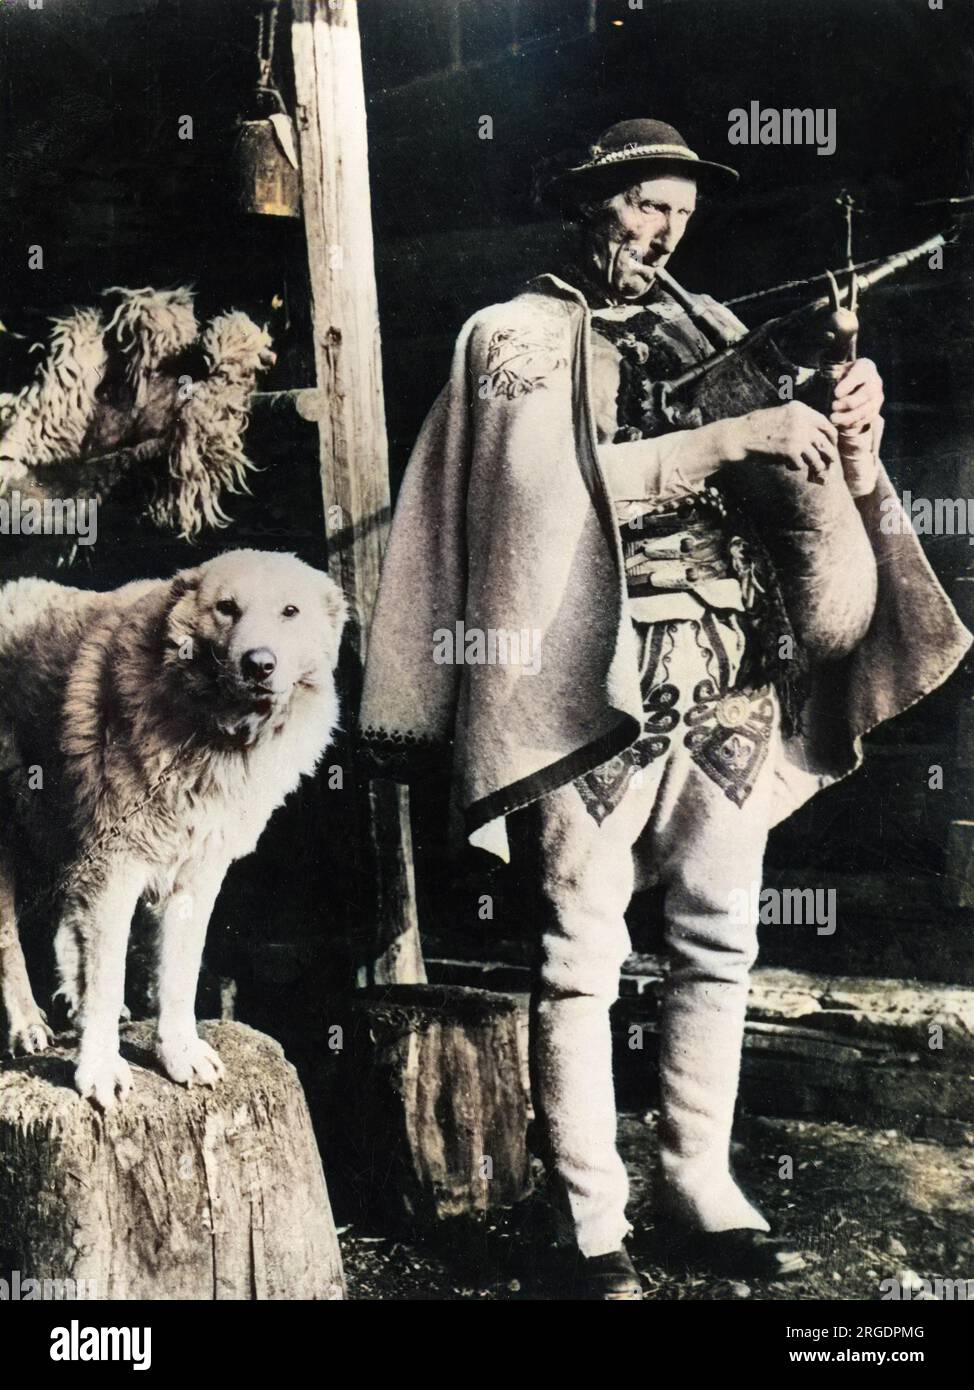 An old man playing the bagpipes in the Tatra mountains of Poland. His costume is made of embroidered goatskin and his dog is a breed peculiar to the area. Stock Photo